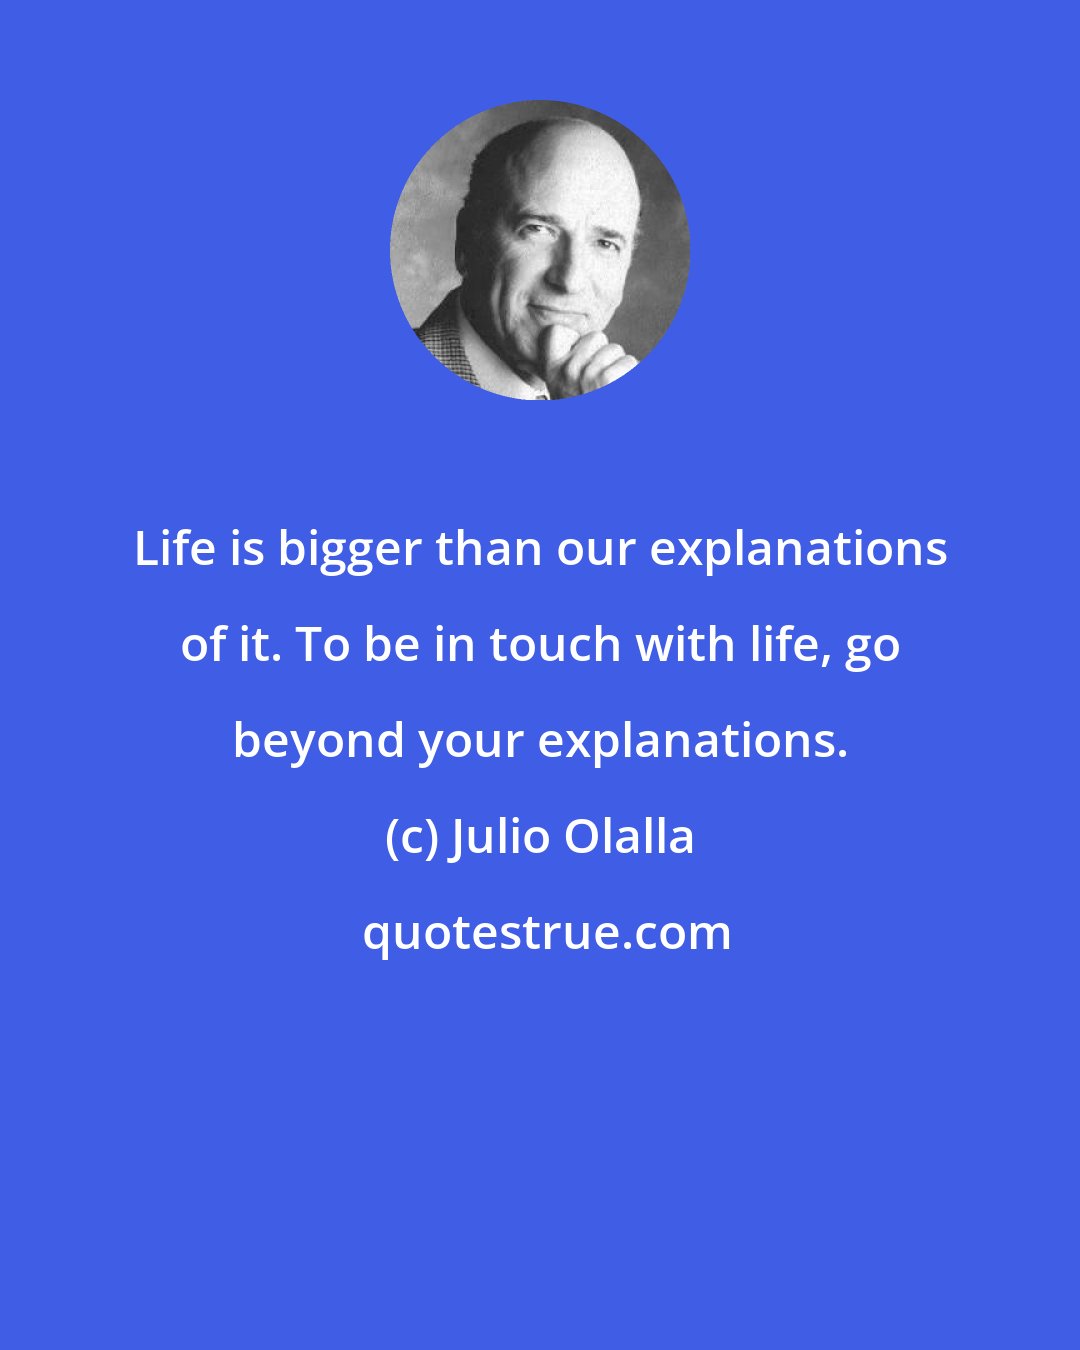 Julio Olalla: Life is bigger than our explanations of it. To be in touch with life, go beyond your explanations.